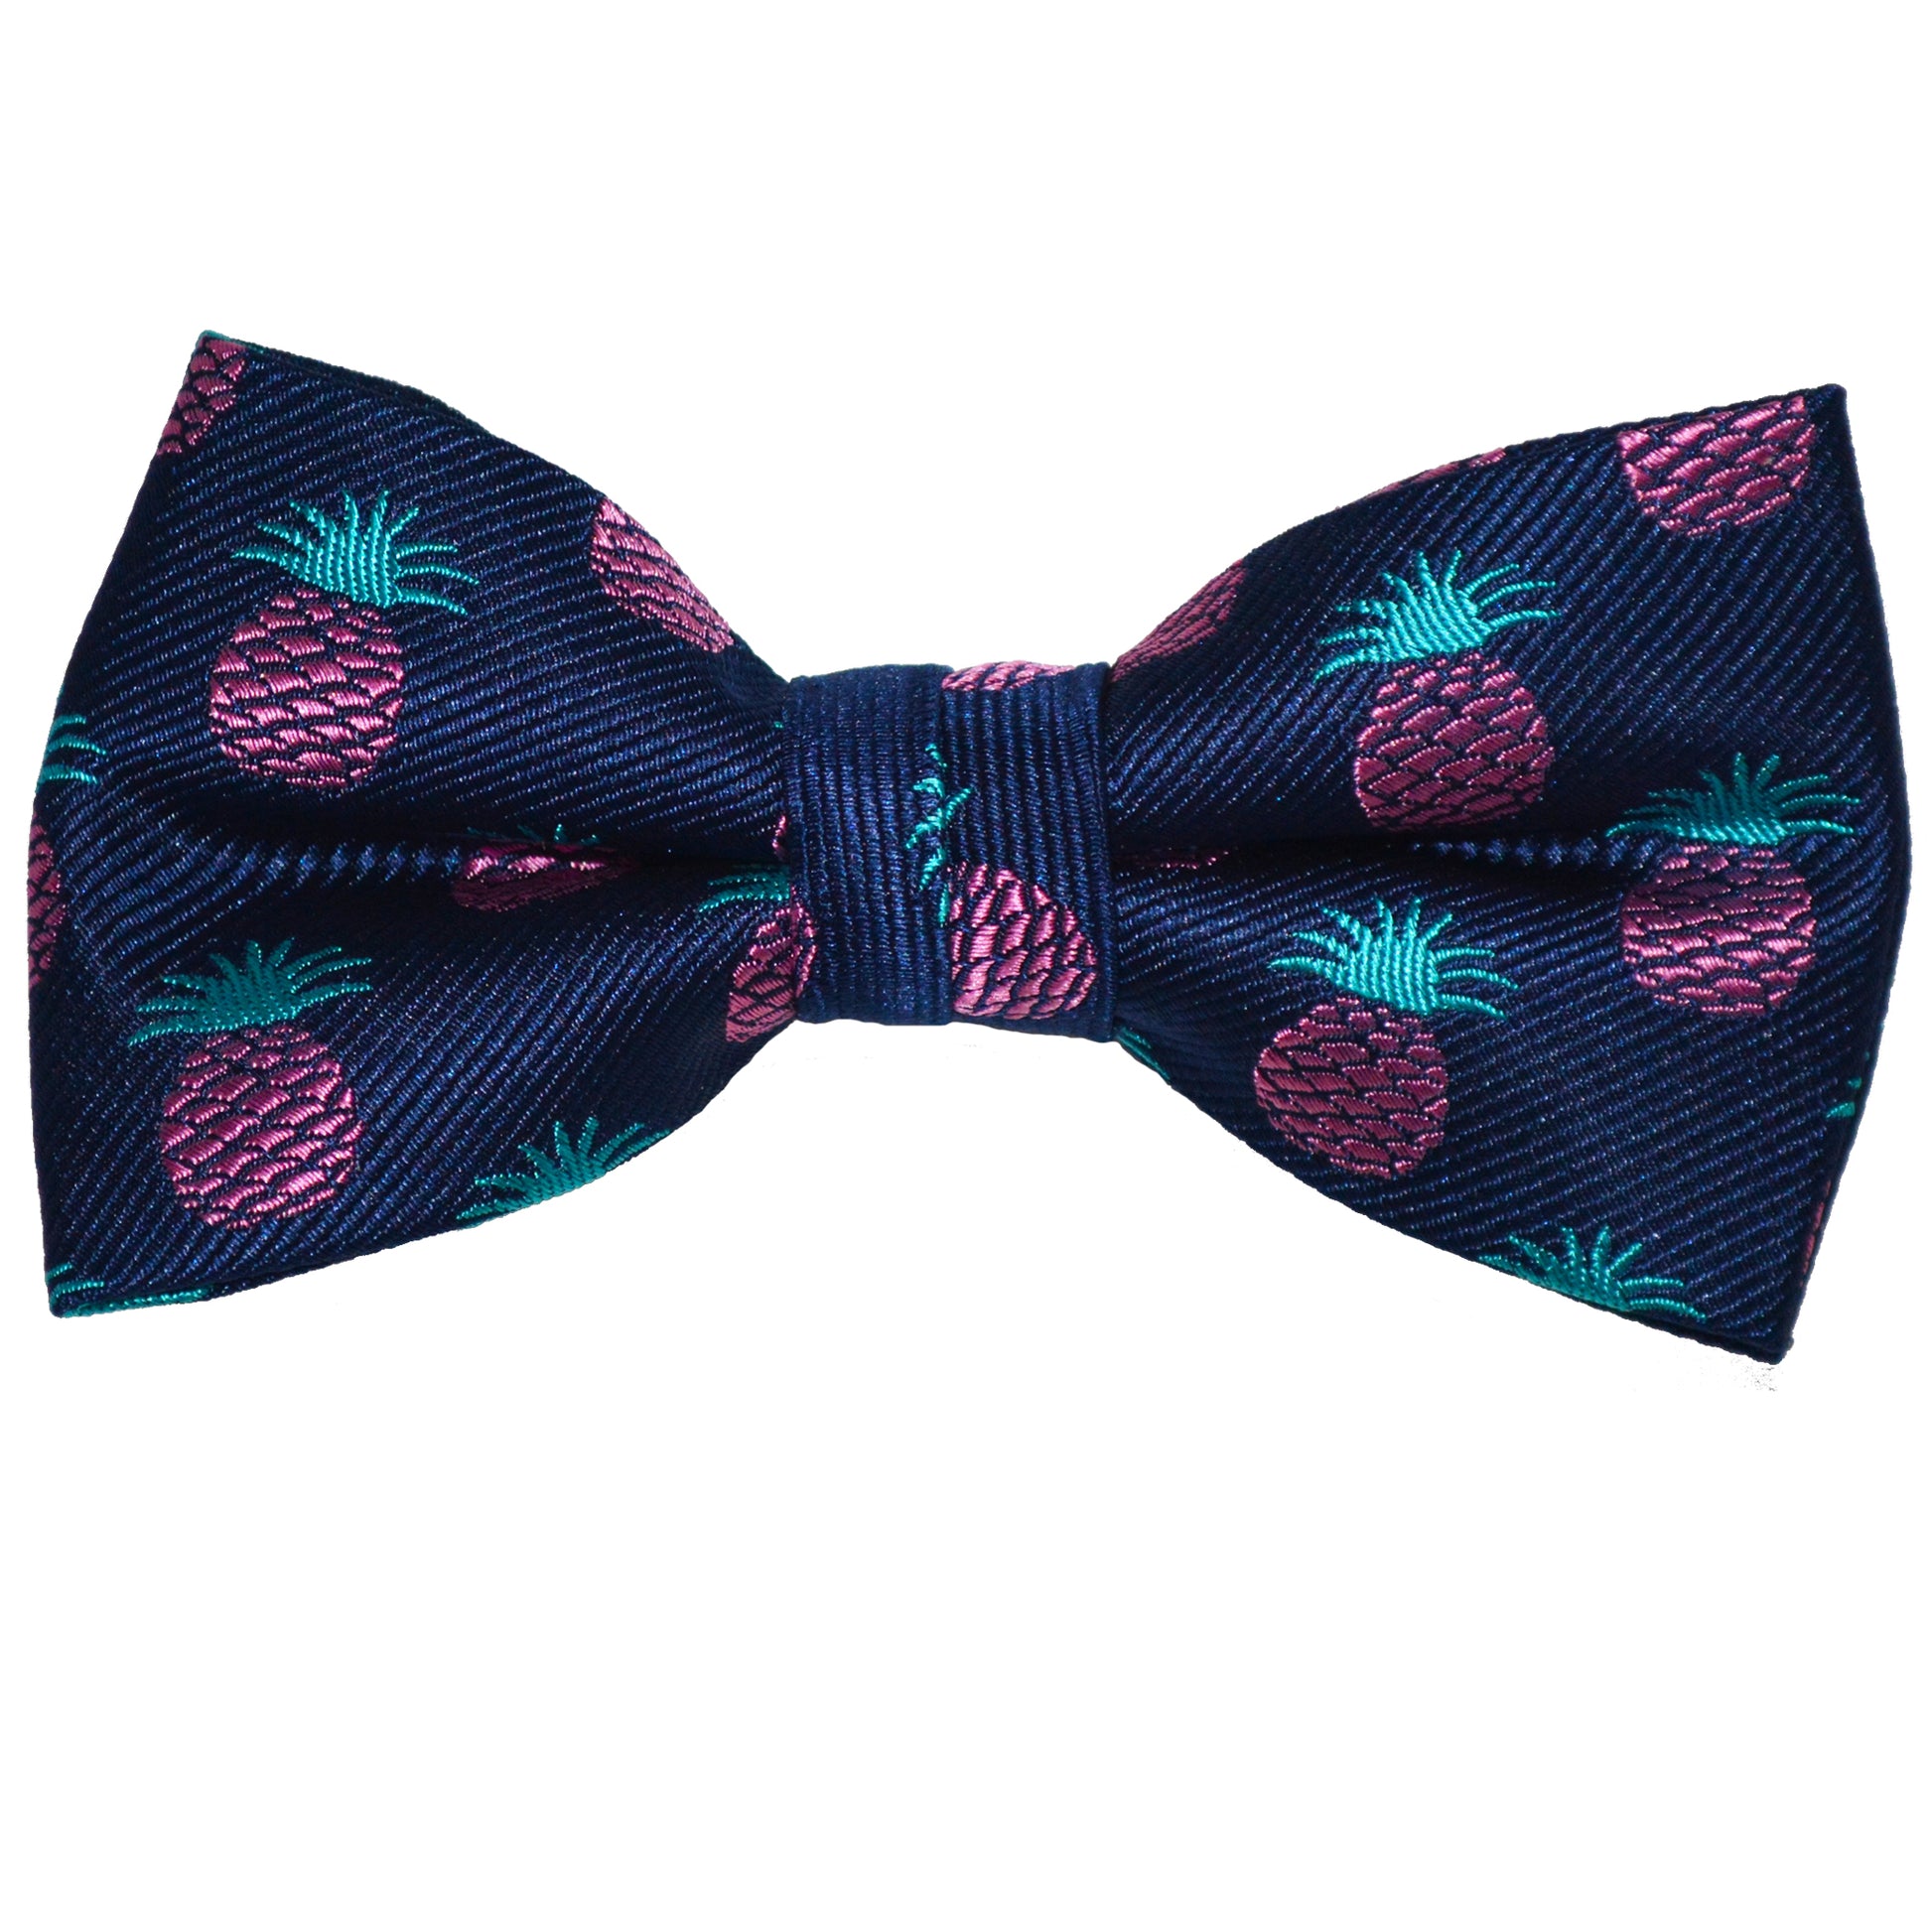 Pineapple Bow Tie - Navy, Woven Silk, Pre-Tied for Kids - SummerTies